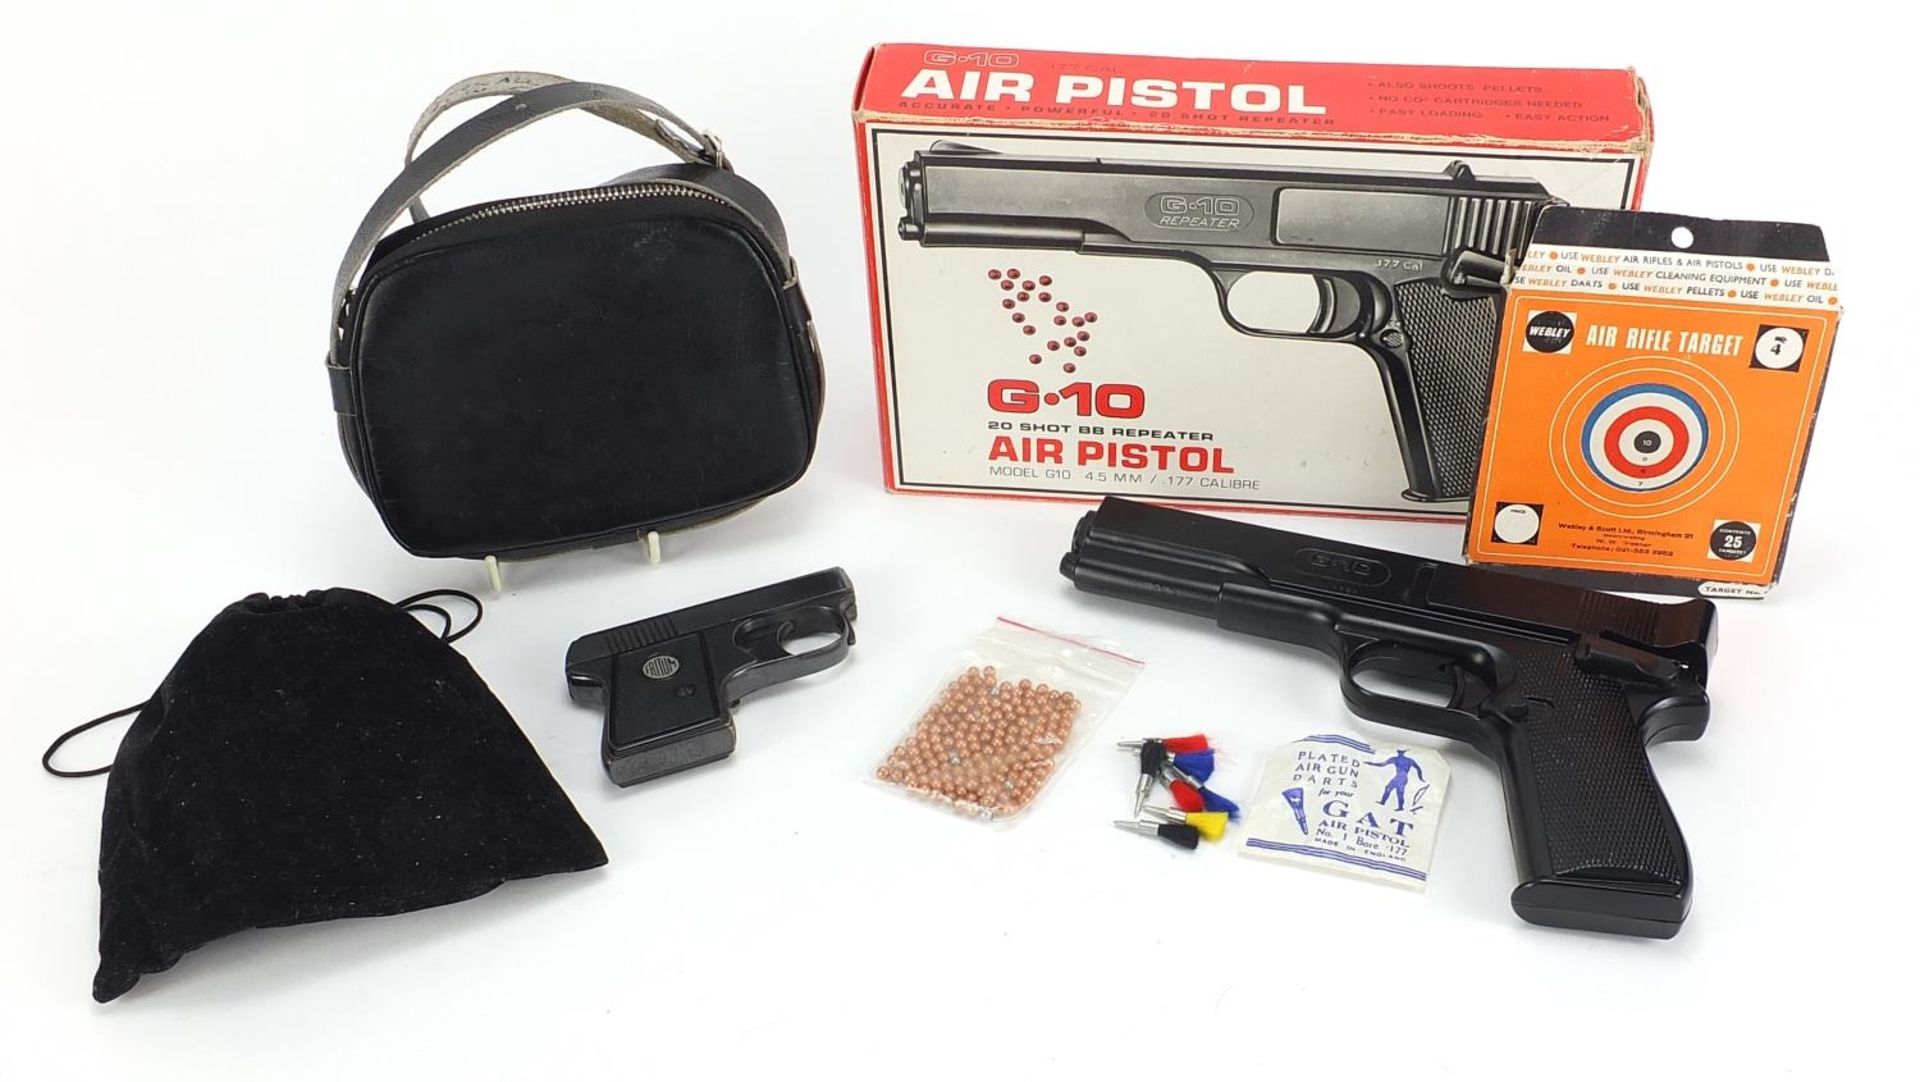 G.10 twenty shot BB repeater .177 cal air pistol with box and a Fritum starting pistol :For